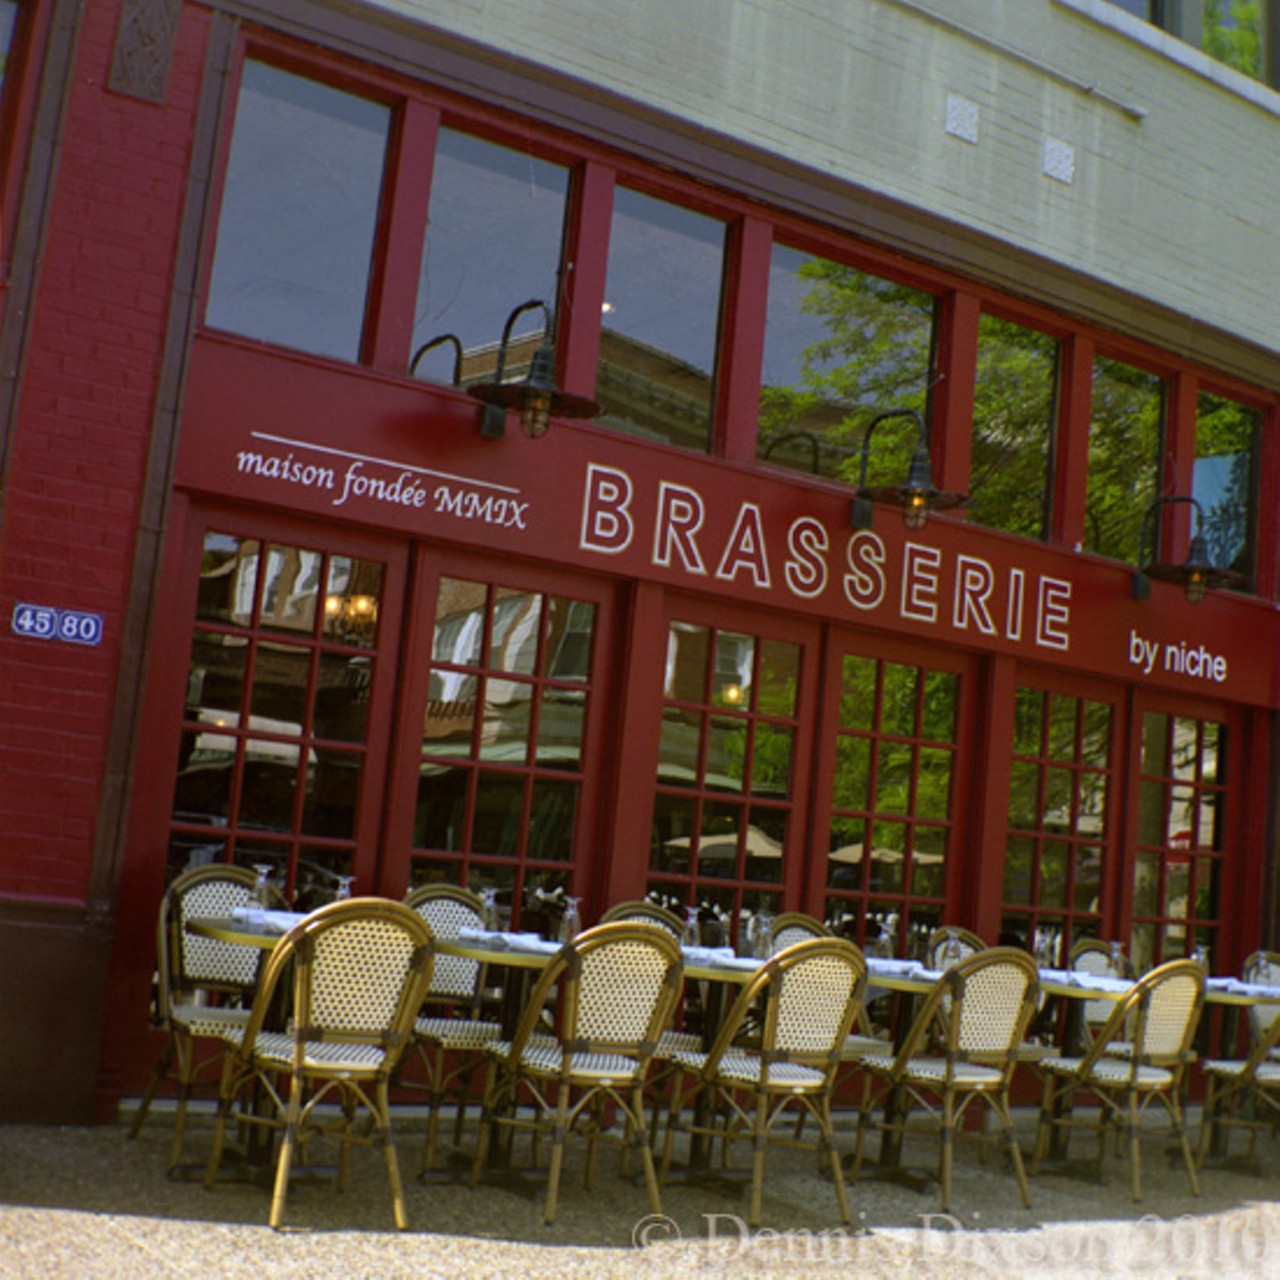 Brasserie by Niche
4580 Laclede Ave.
St. Louis, MO 63108
(314) 454-0600
Considering that chef Gerard Craft is the mastermind behind this place, you know the food has to be good. You can grab a table outside and enjoy your favorite French dishes for lunch and dinner, as well as brunch on the weekend -- and some excellent people watching. Photo courtesy of Flickr / Dennis Dixson.